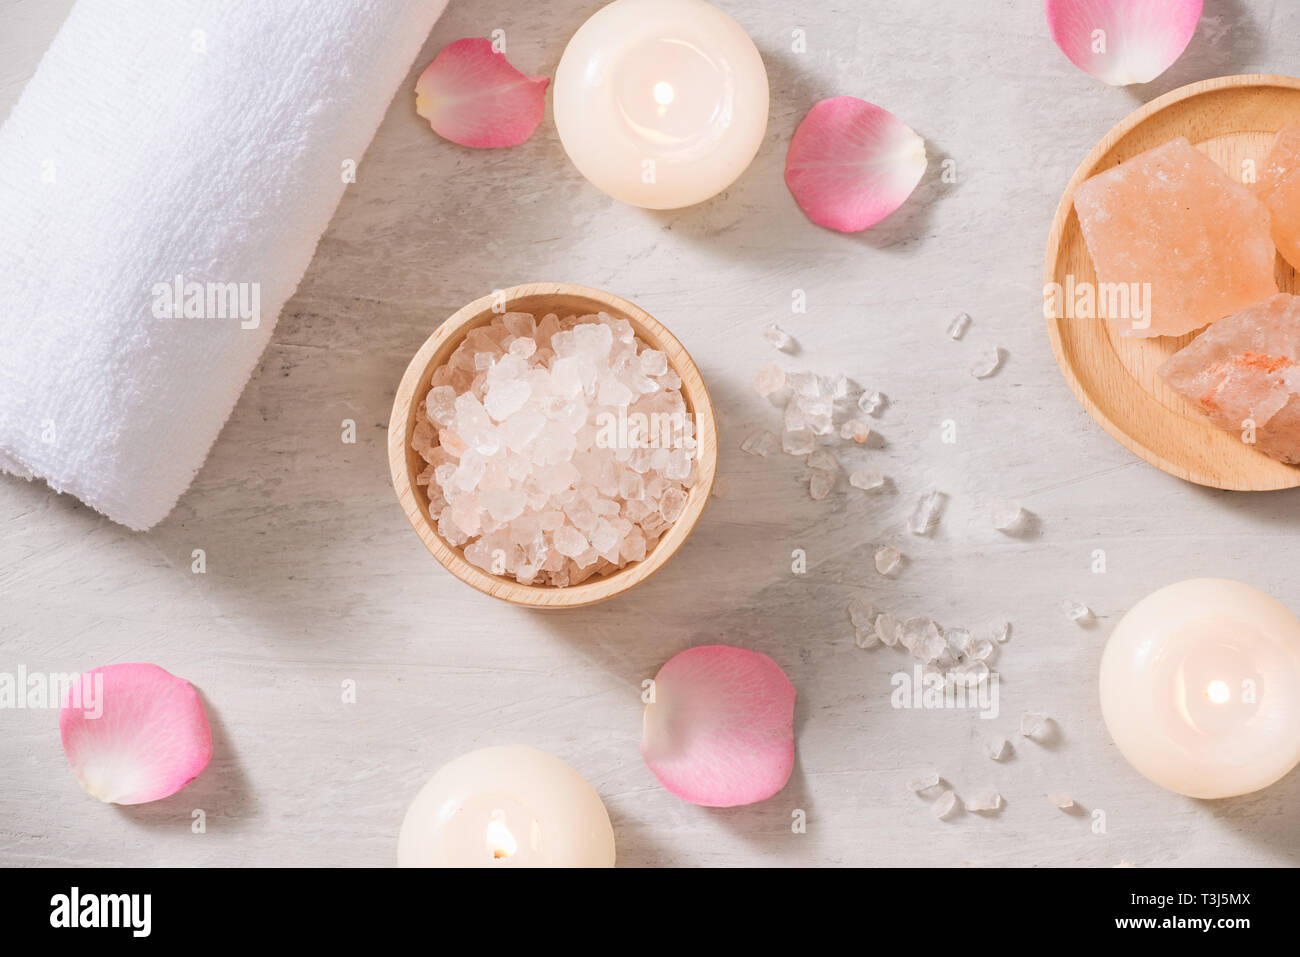 Spa settings with roses. Spa theme with candles and flowers on table. Stock Photo